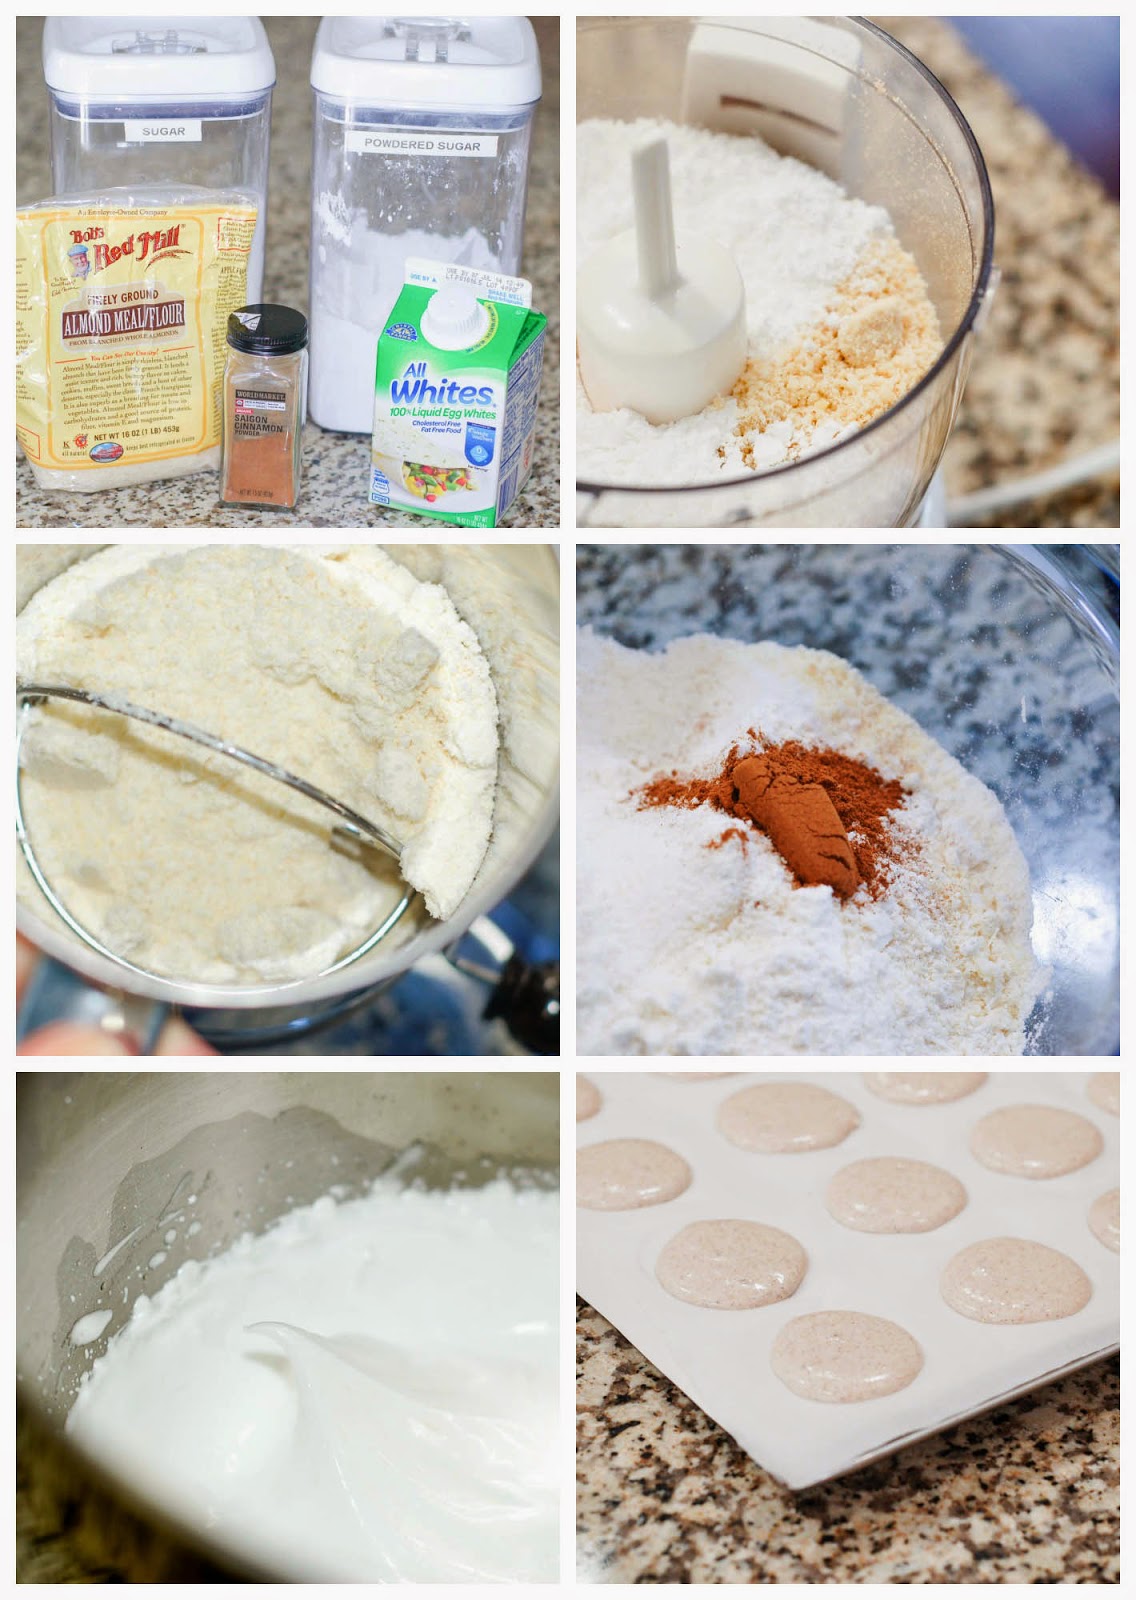 Making Churro Macarons by The Sweet Chick